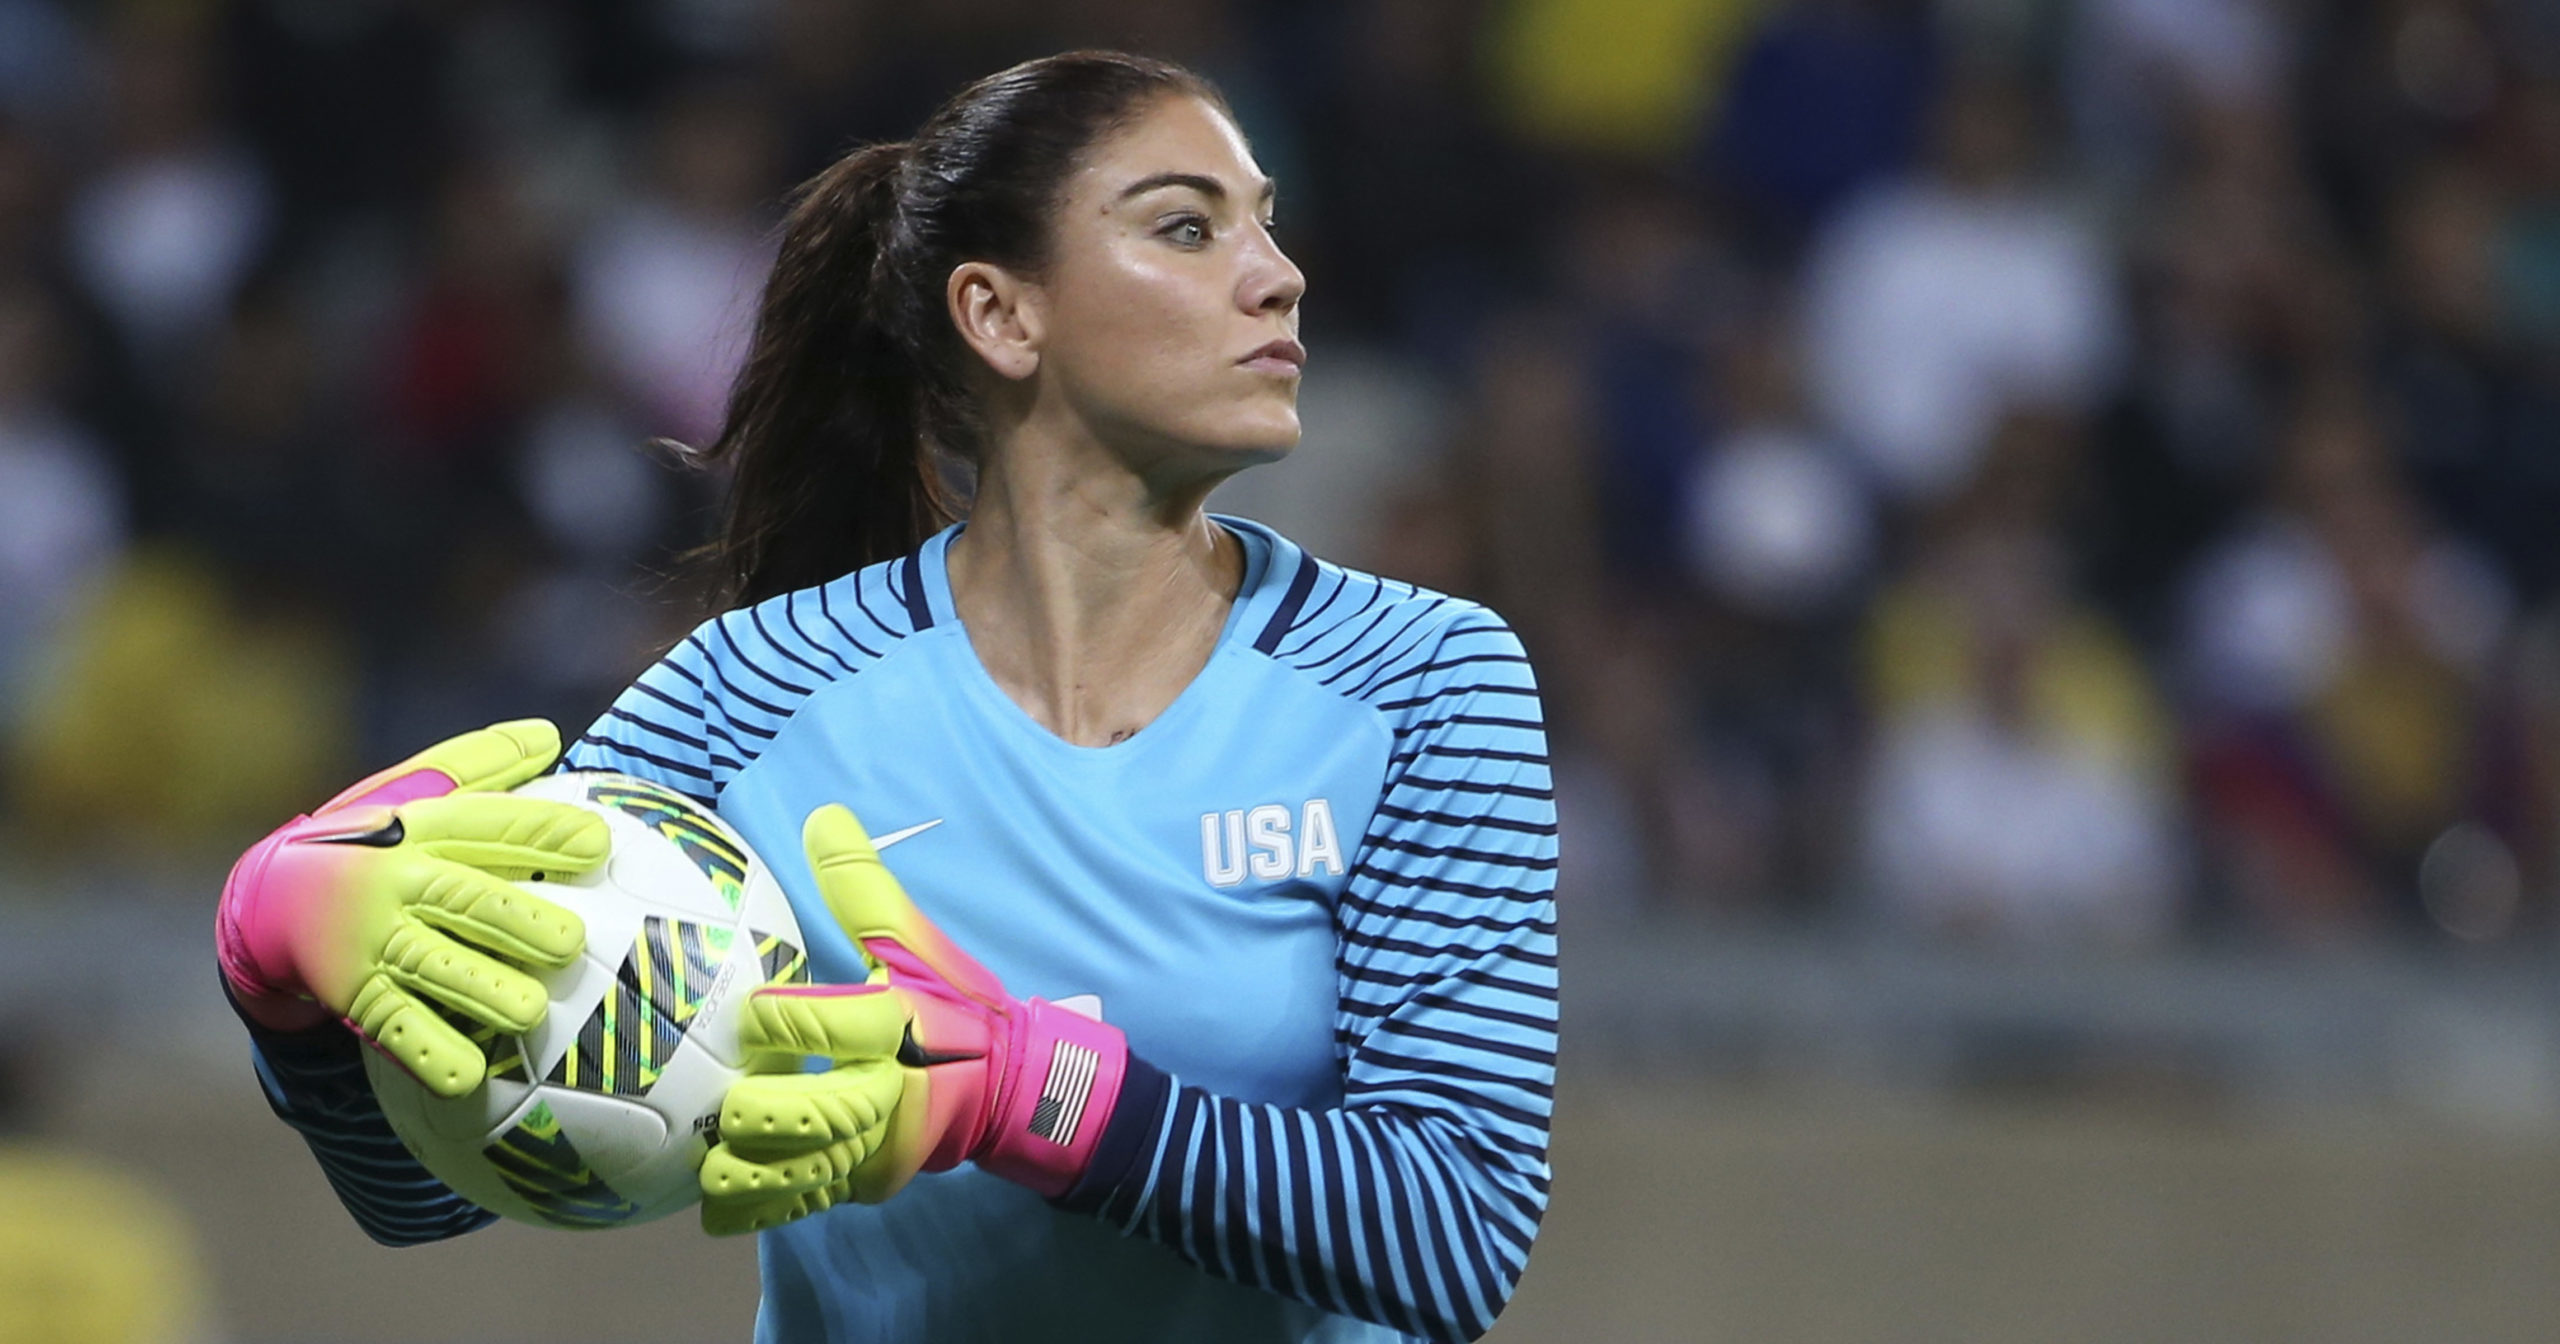 U.S. goalkeeper Hope Solo plays in a women's soccer game against New Zealand at the Rio Olympics in Belo Horizonte, Brazil, on Aug. 3, 2016.